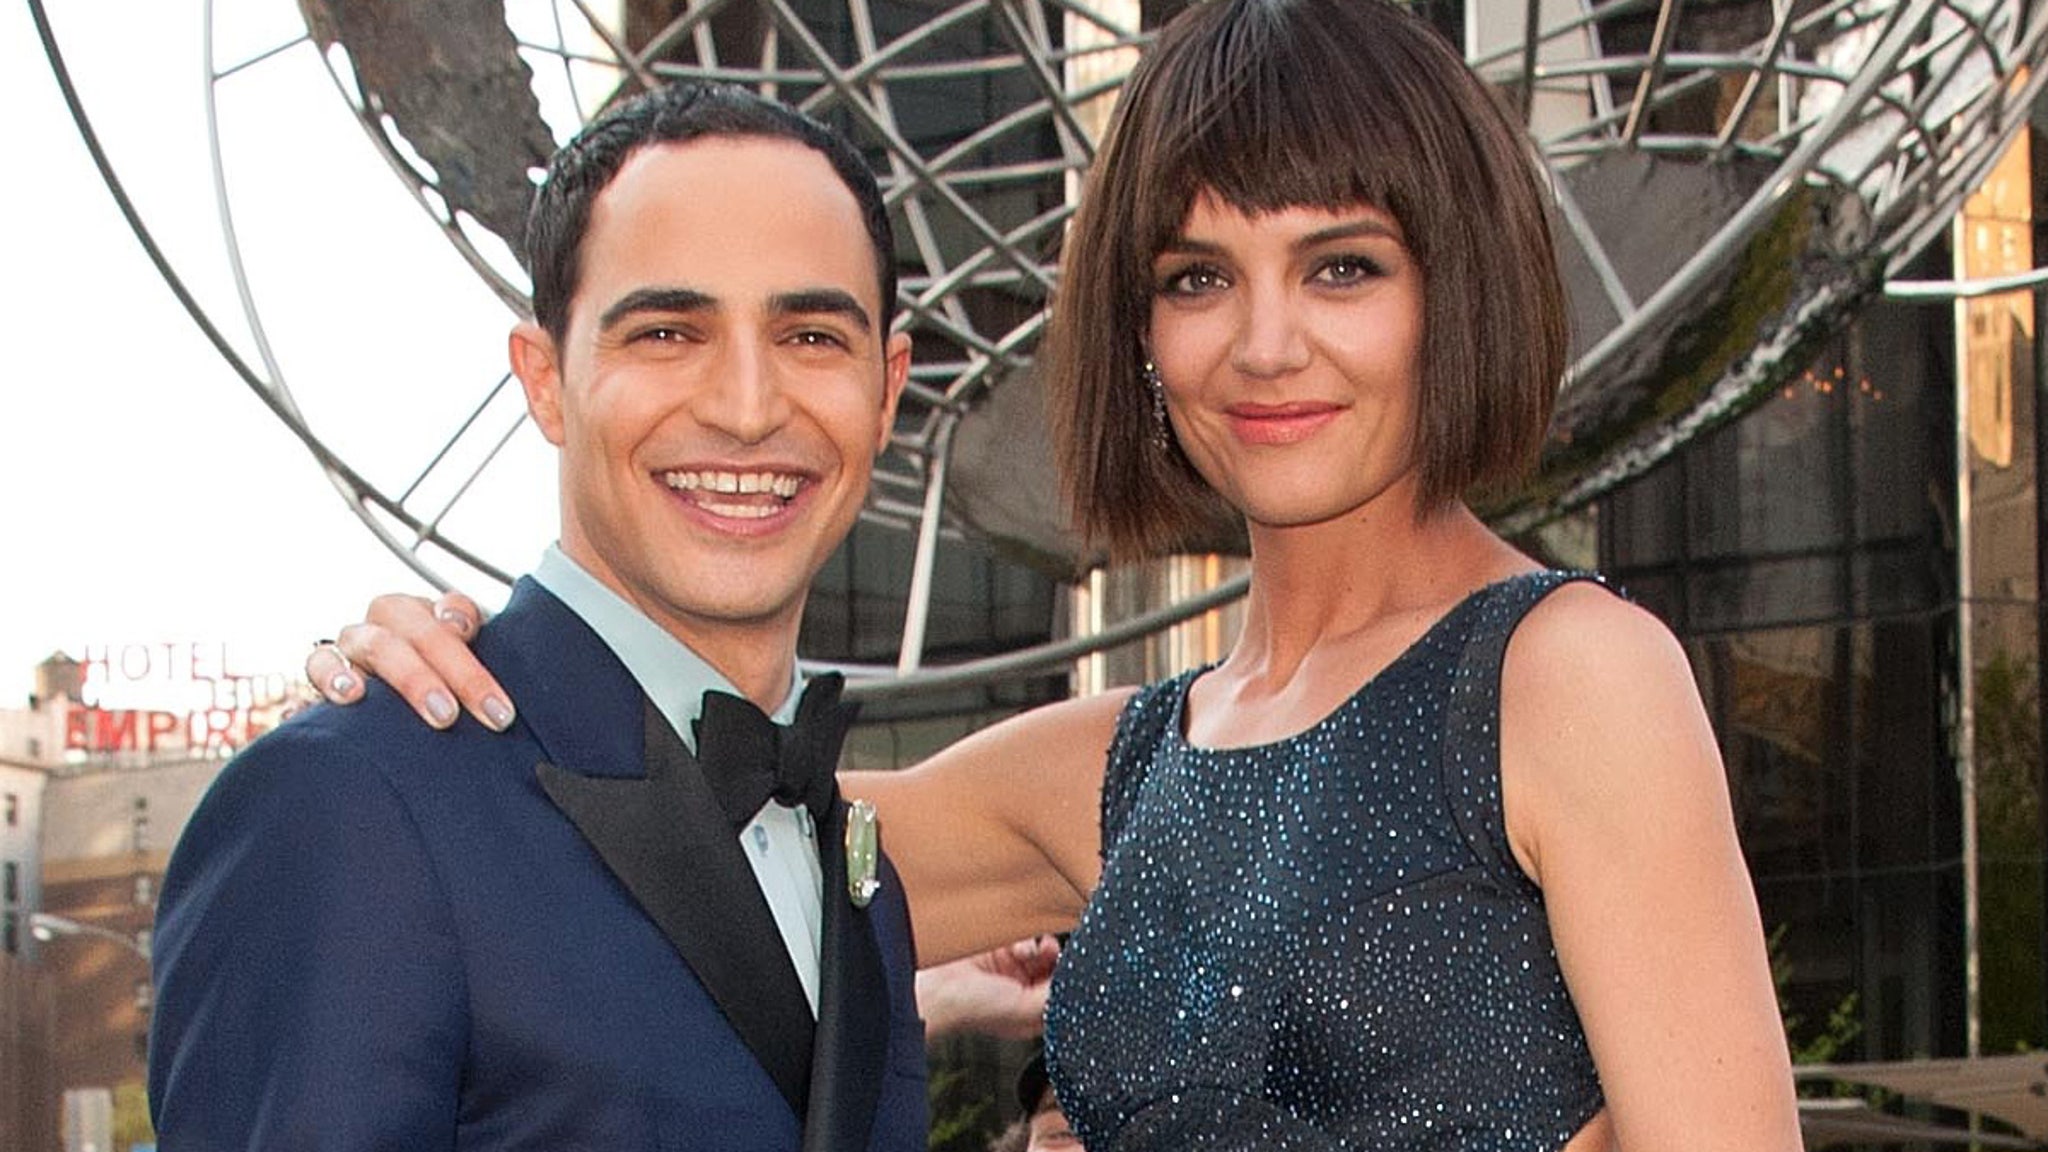 Katie Holmes Chops Off Her Hair for 2015 Met Gala ... Or Did She?